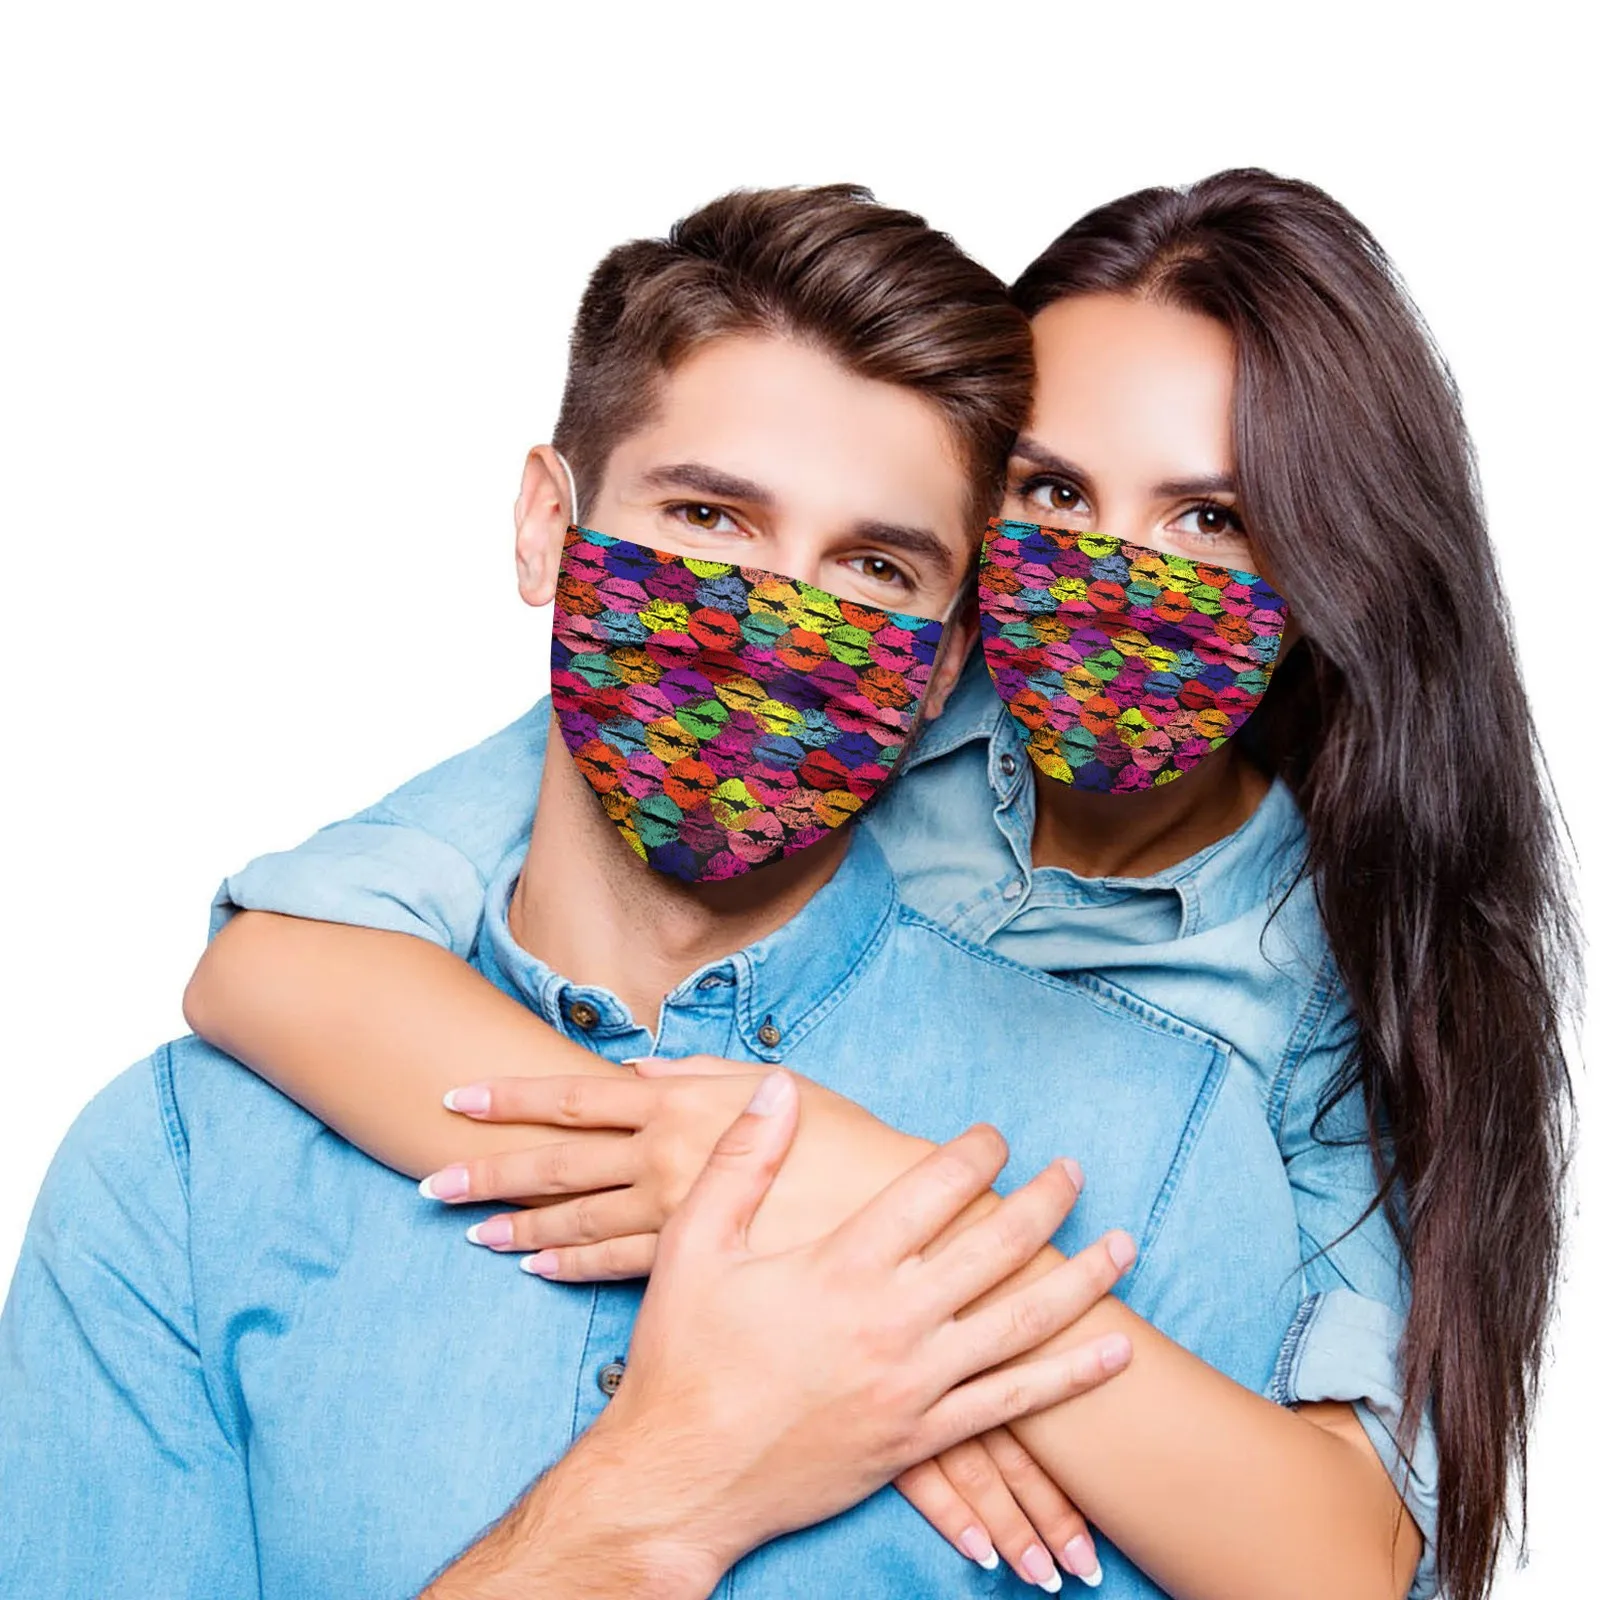 family of 3 halloween costumes 10PC Mascarillas Adult Disposable Mask Valentine's Day Heart Love Print Face Mask Protective Desechables Halloween Cosplay Mask unique halloween costumes